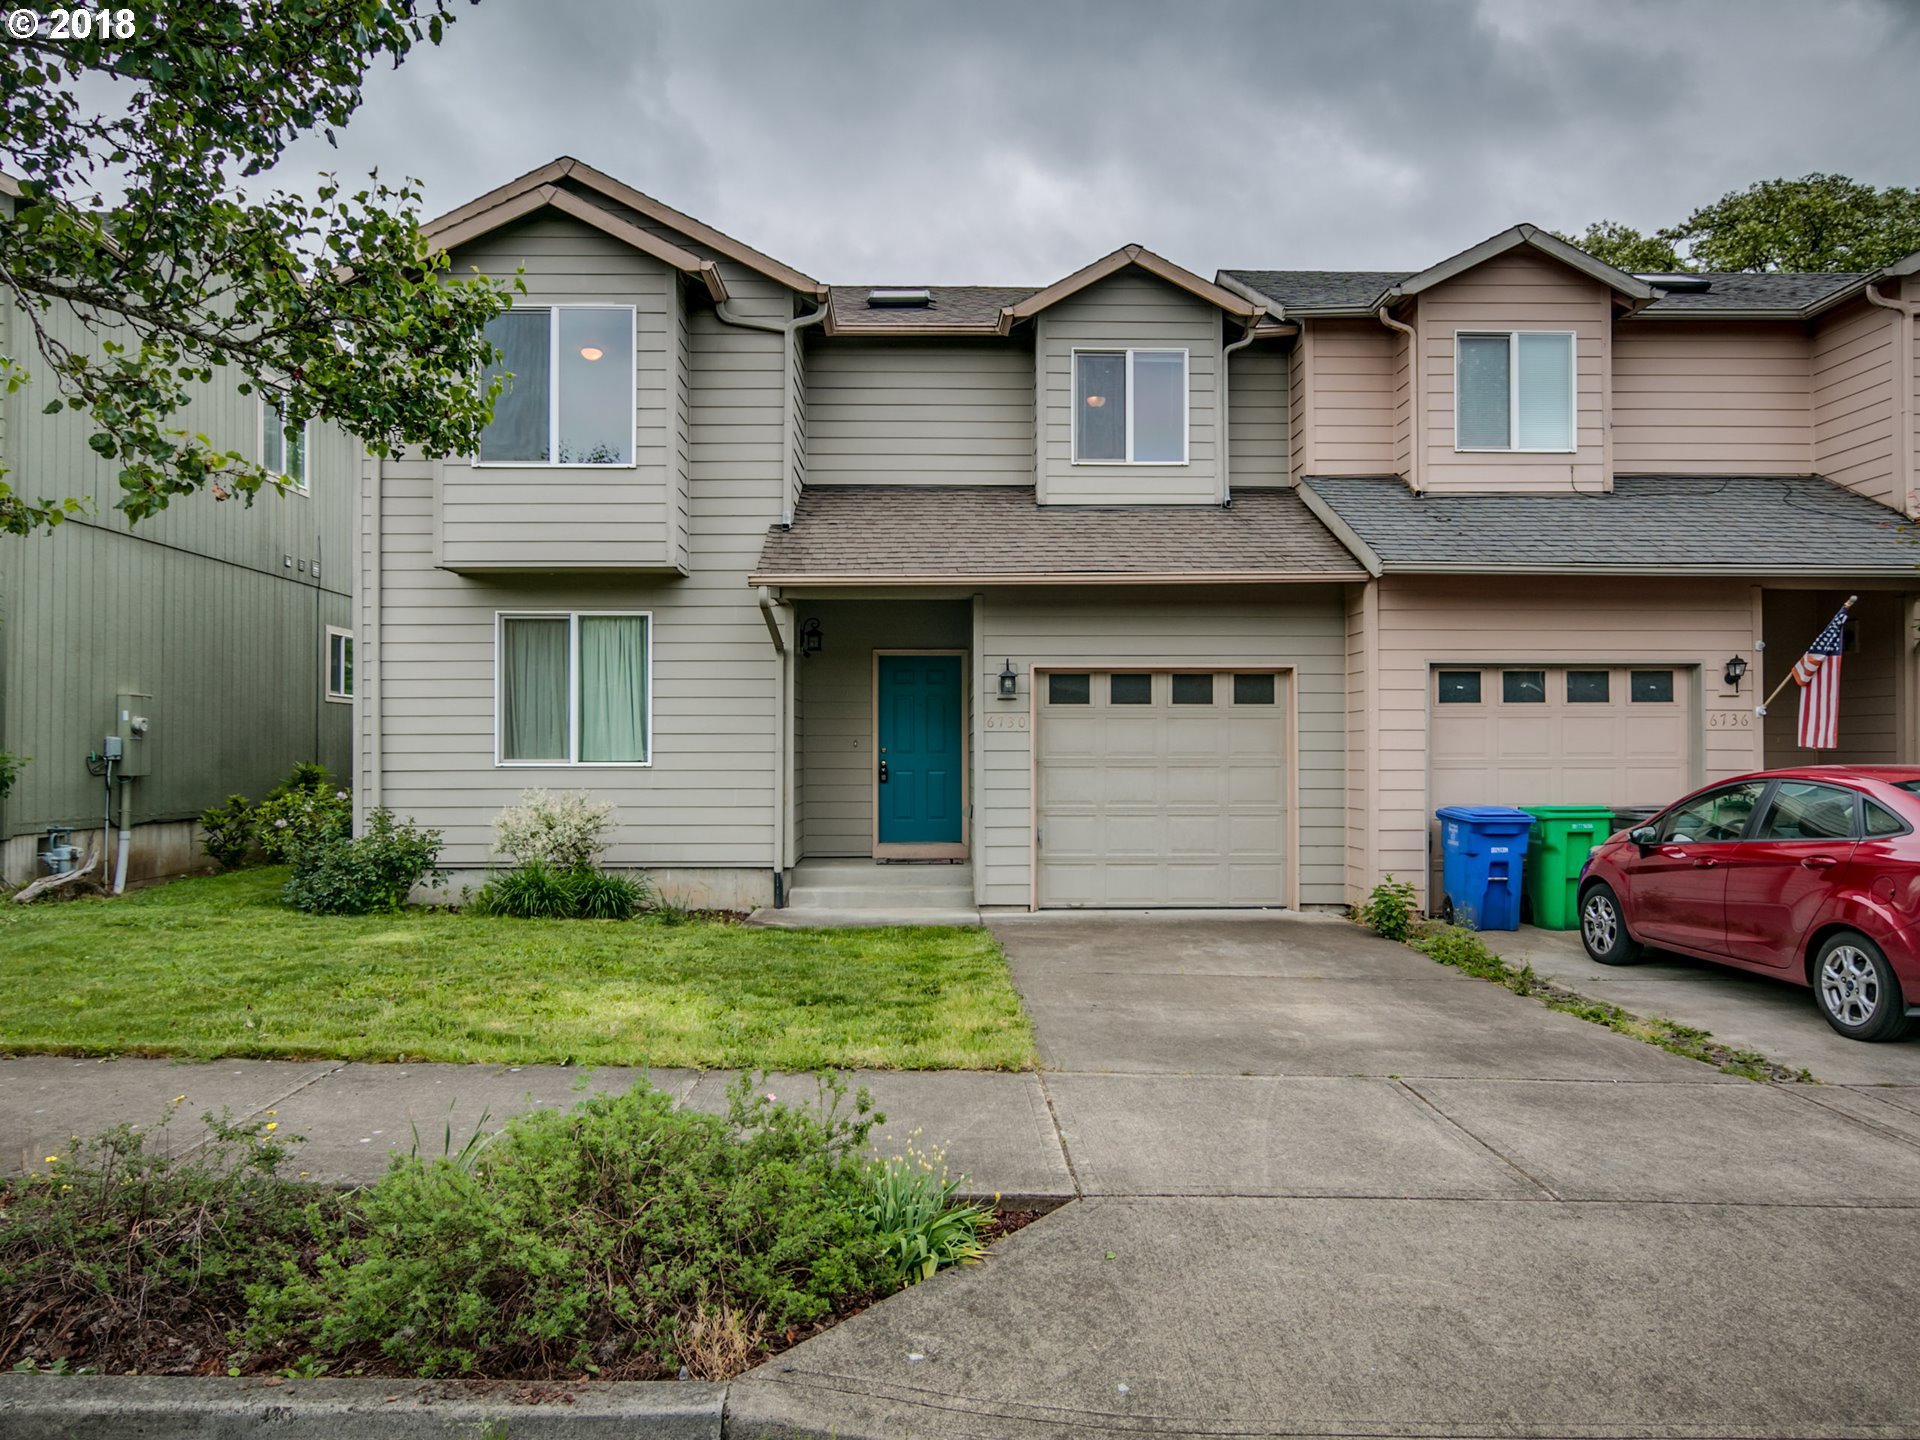 6730 SE 136TH AVE (1 of 21)